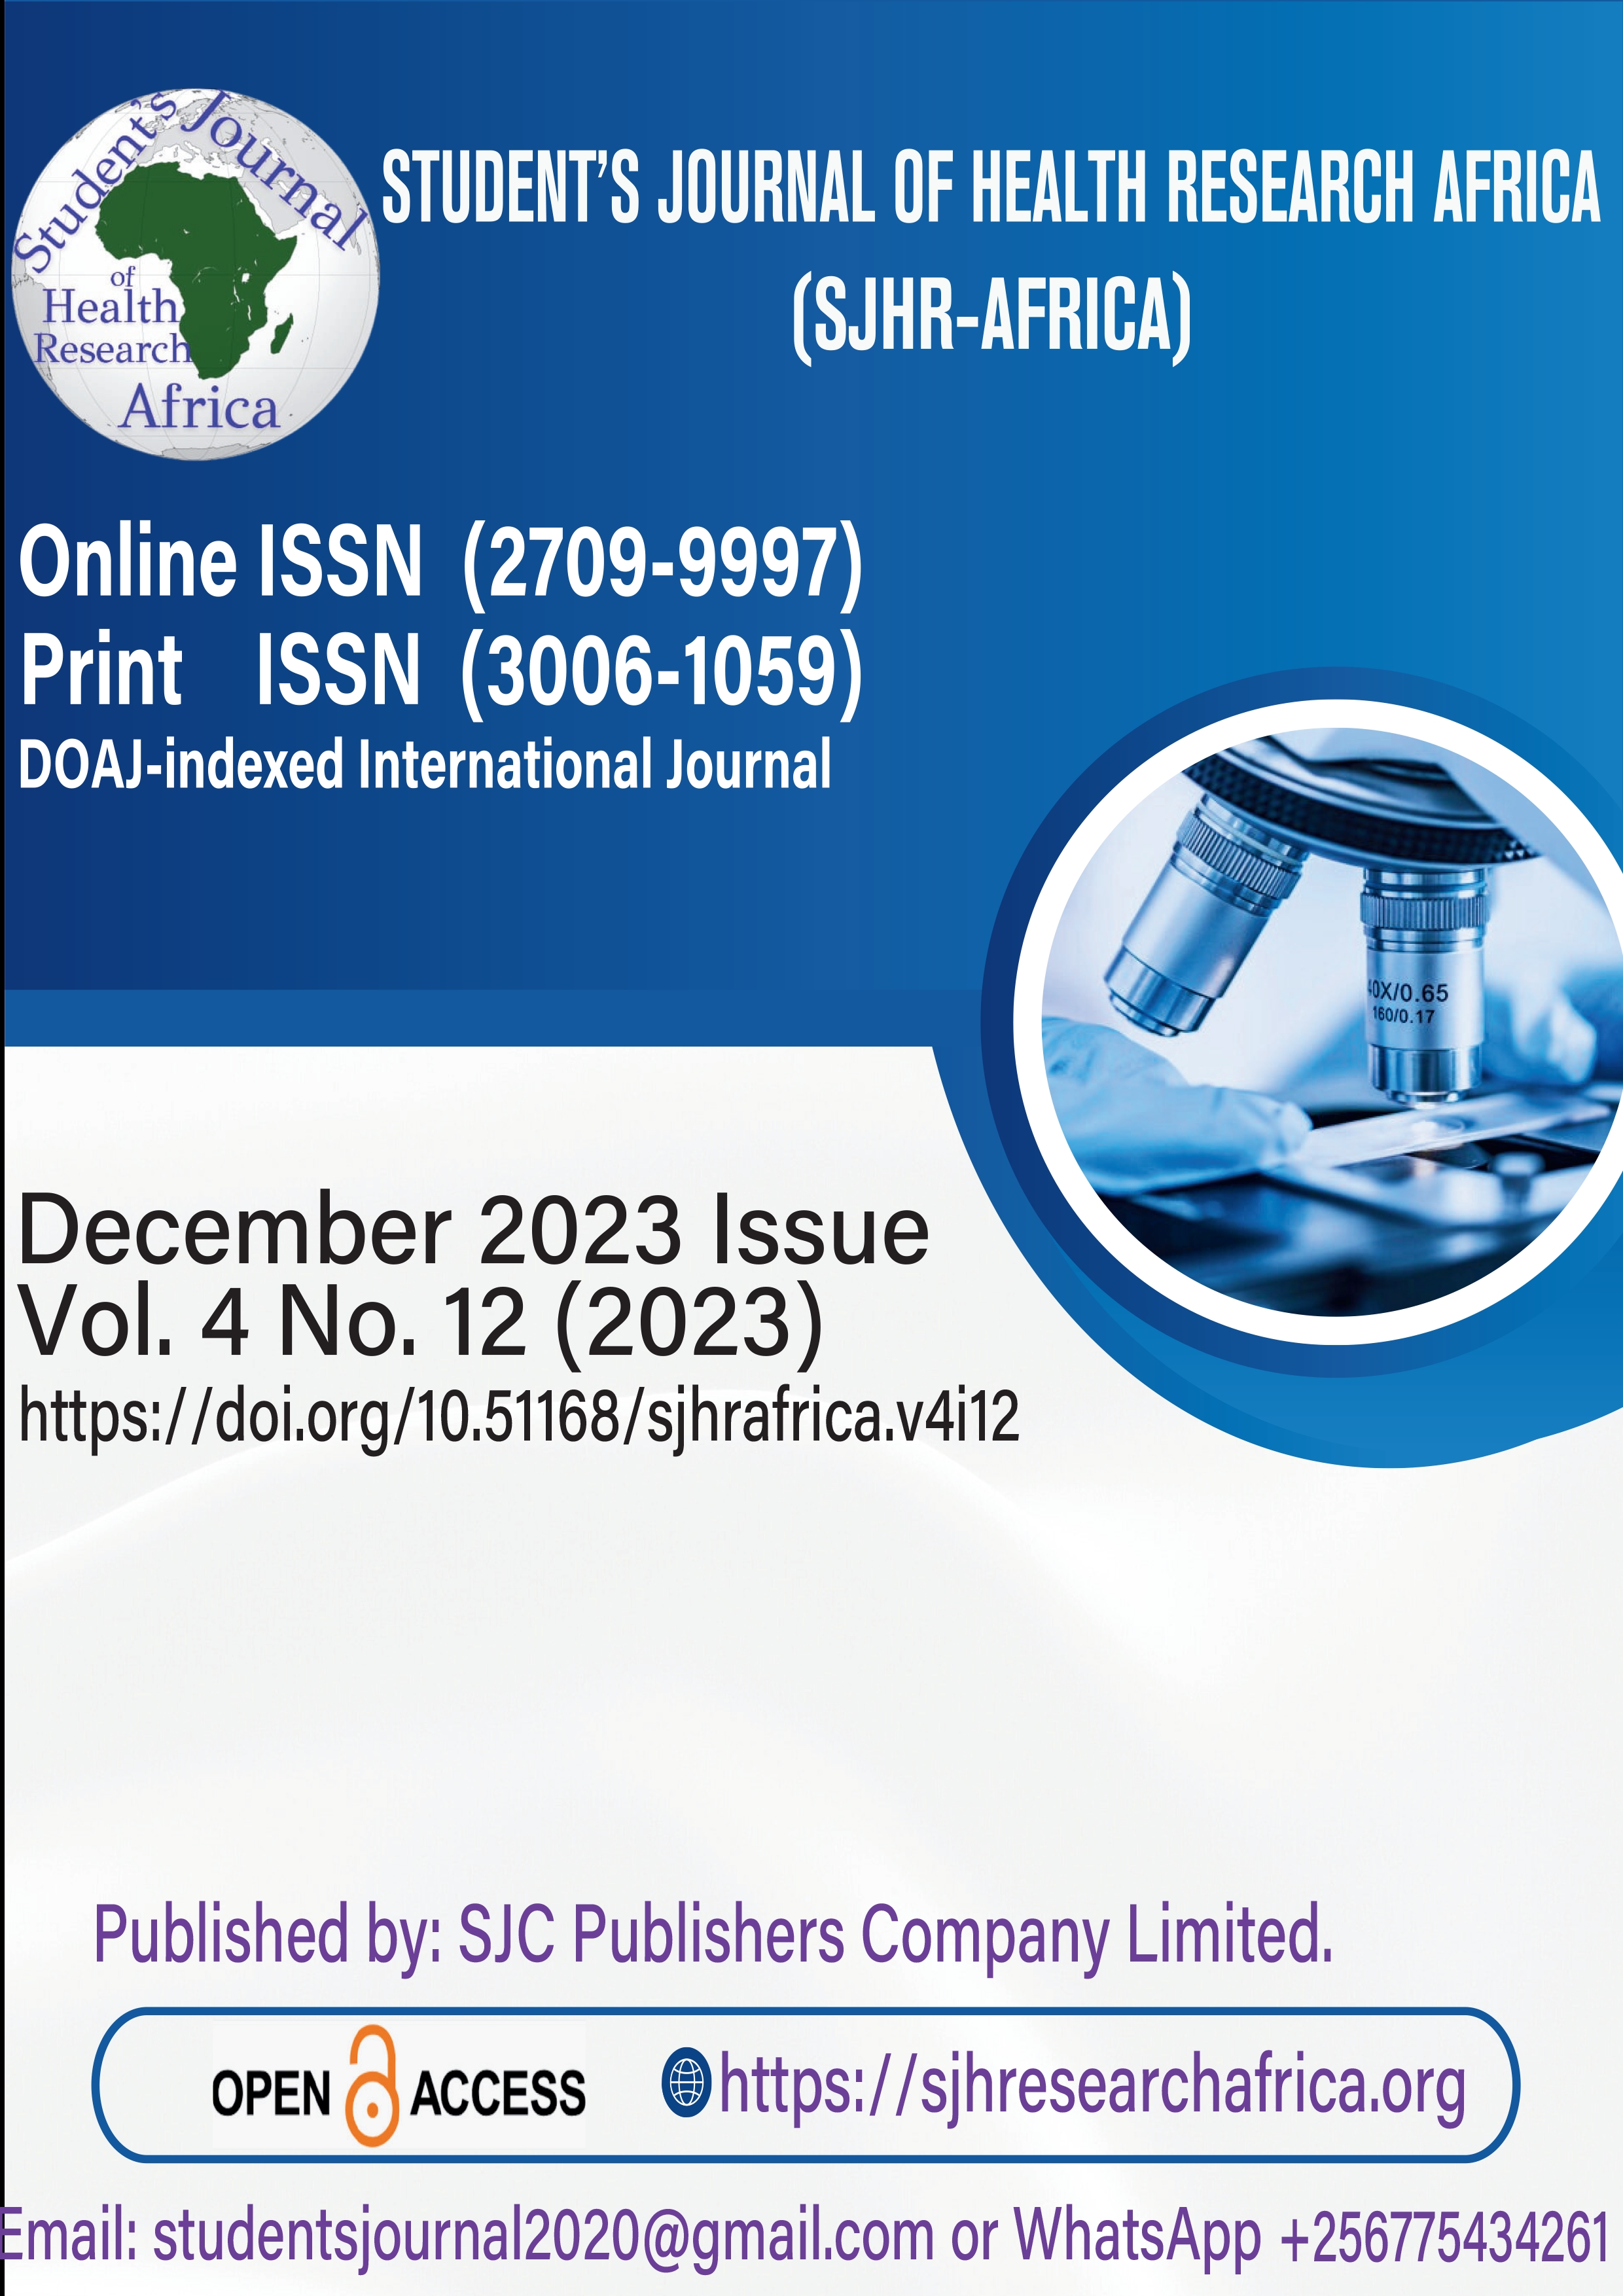 Cover page for December 2023 issue